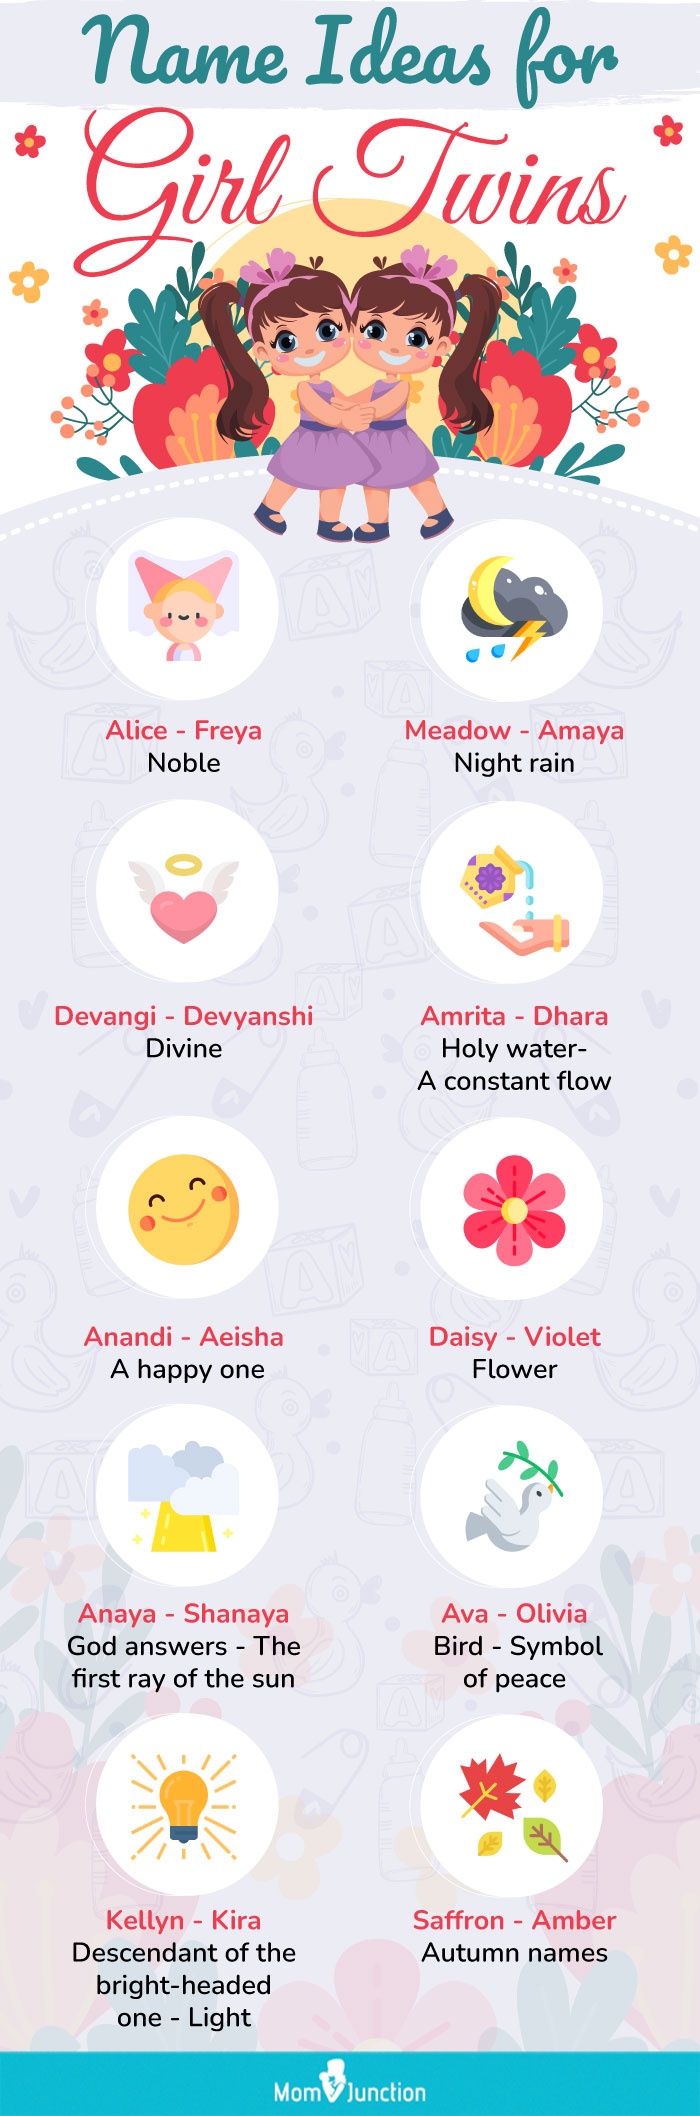 name ideas for girl twins (infographic)